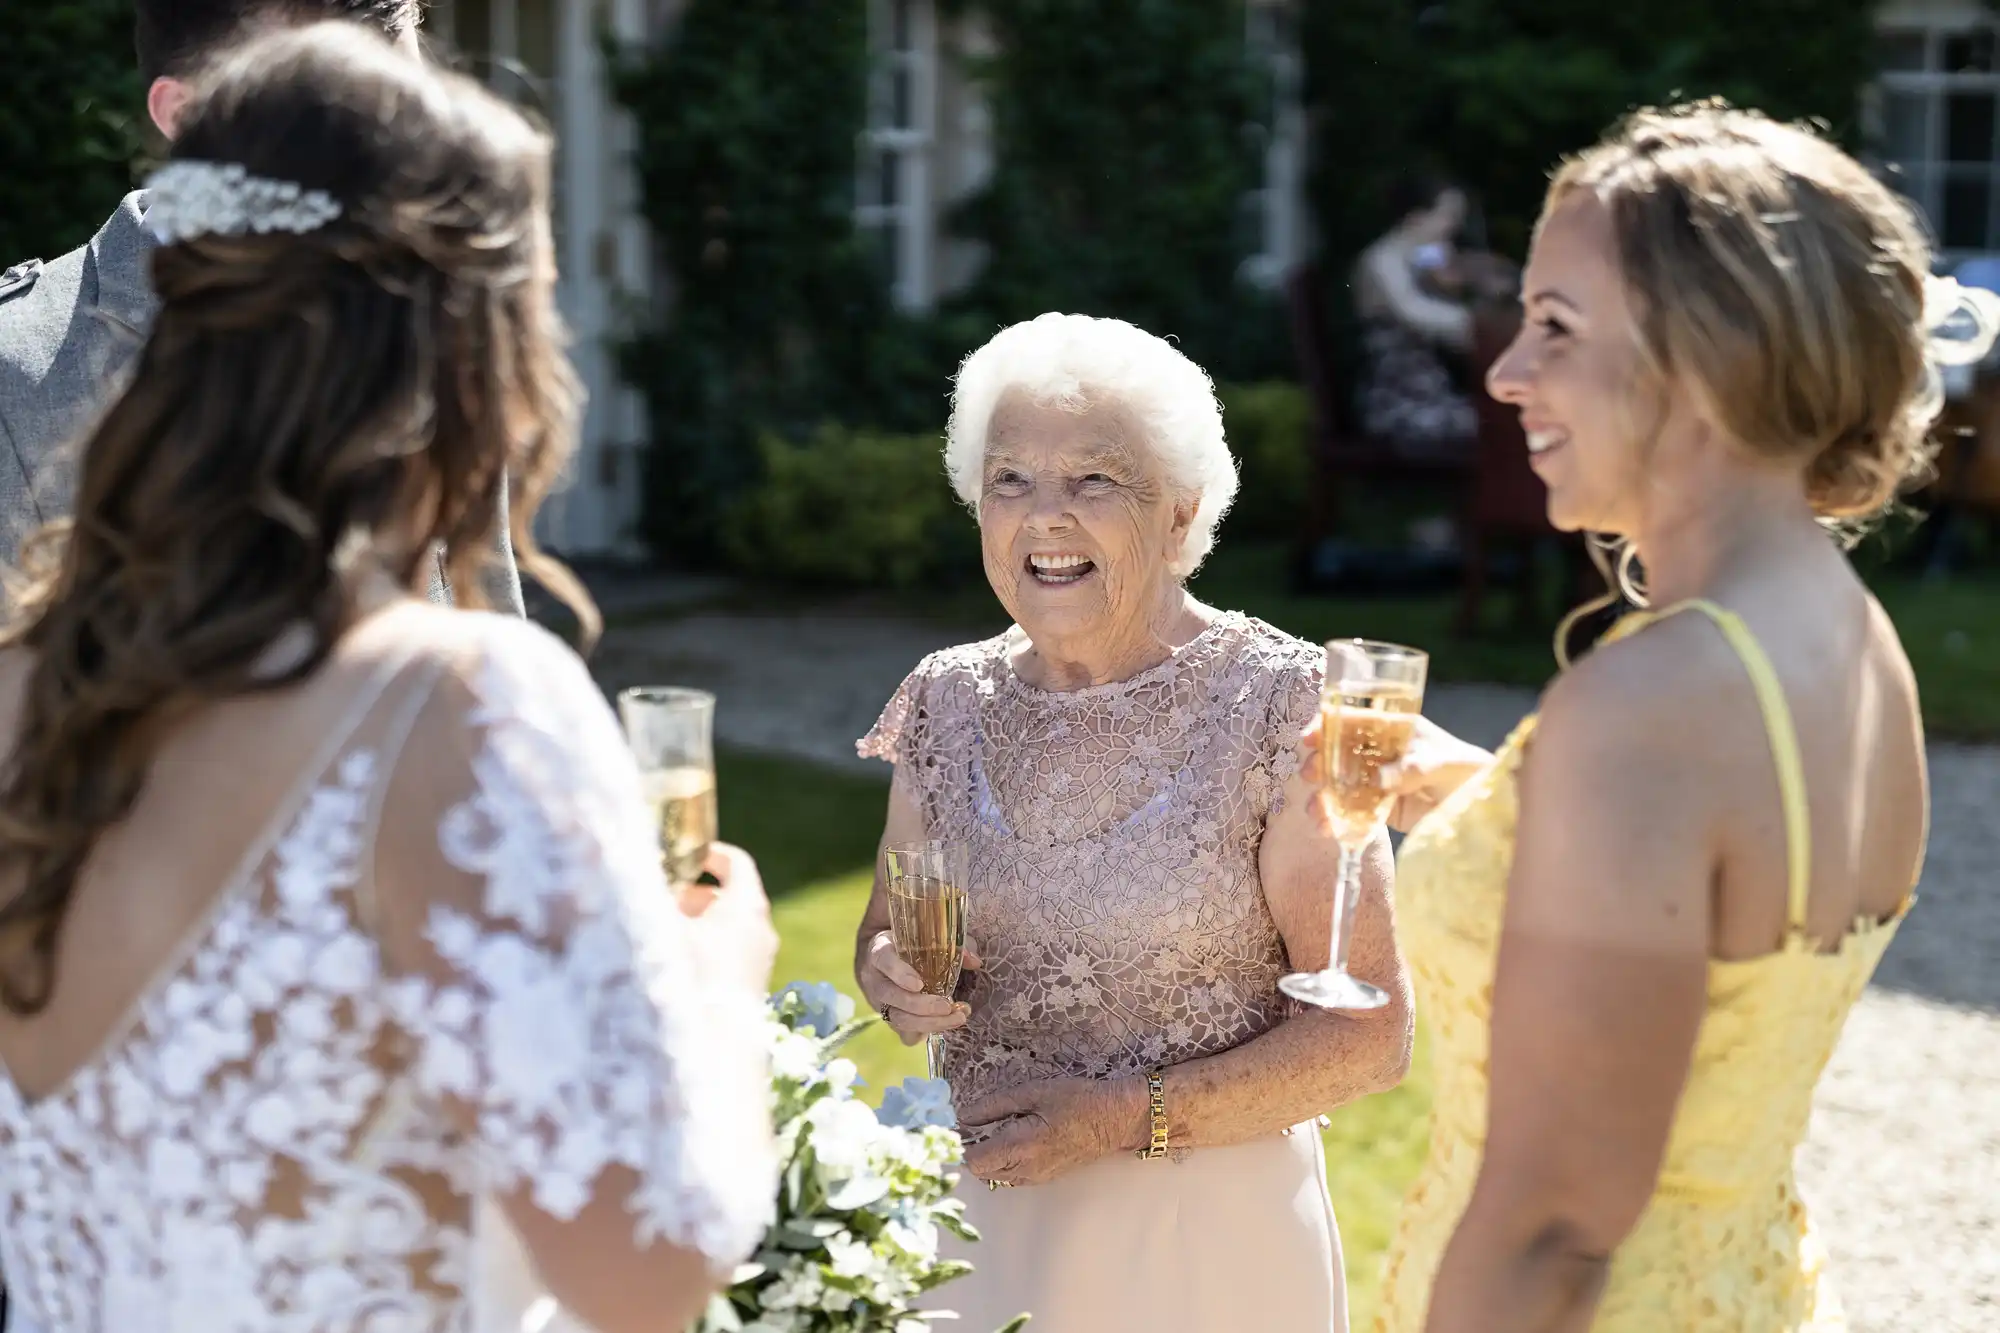 An elderly woman in a pink lace dress smiles joyfully at a bride and another guest, all holding champagne glasses at a sunny, outdoor wedding celebration.